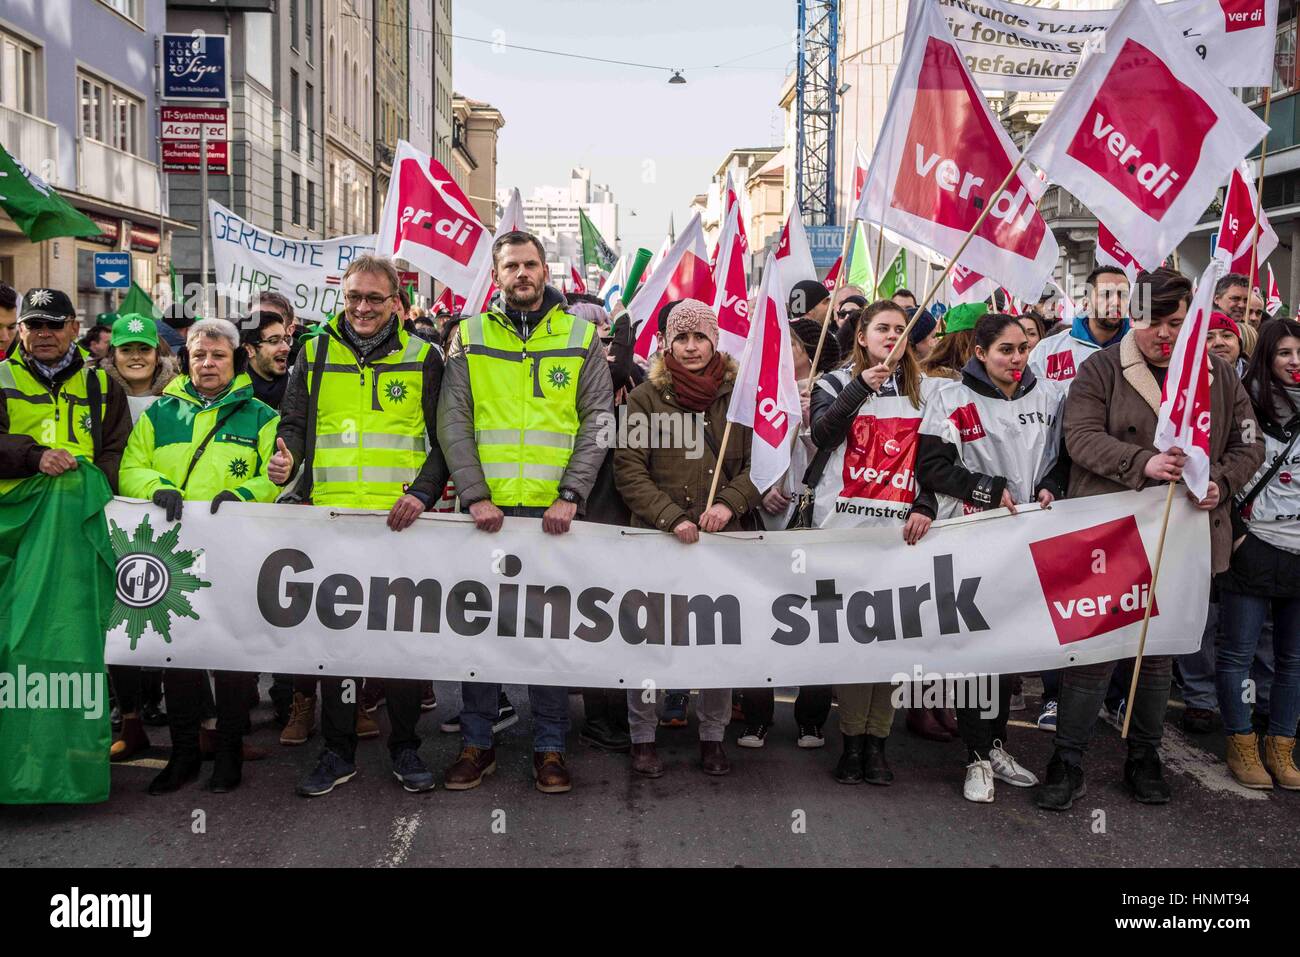 Munich, Germany. 14th Feb, 2017. The Ver.di and police unions called for a warning strike today in Munich in a series of strikes in Germany. Included in the strike are workers of the TU and LMU universities, Deutsches Museum, courts, hospitals, Bayerische Staatsoper, Bayerisches Schauspiel, and others including highway workers. The demonstration start was at the Gewerkschaftshaus on Schwanthalerstrasse and ended at the famed Geschwister-Scholl-Platz at the LMU university. Police are demanding a raise of 6% and modifications to the training structures. The third round of discussions fo Stock Photo